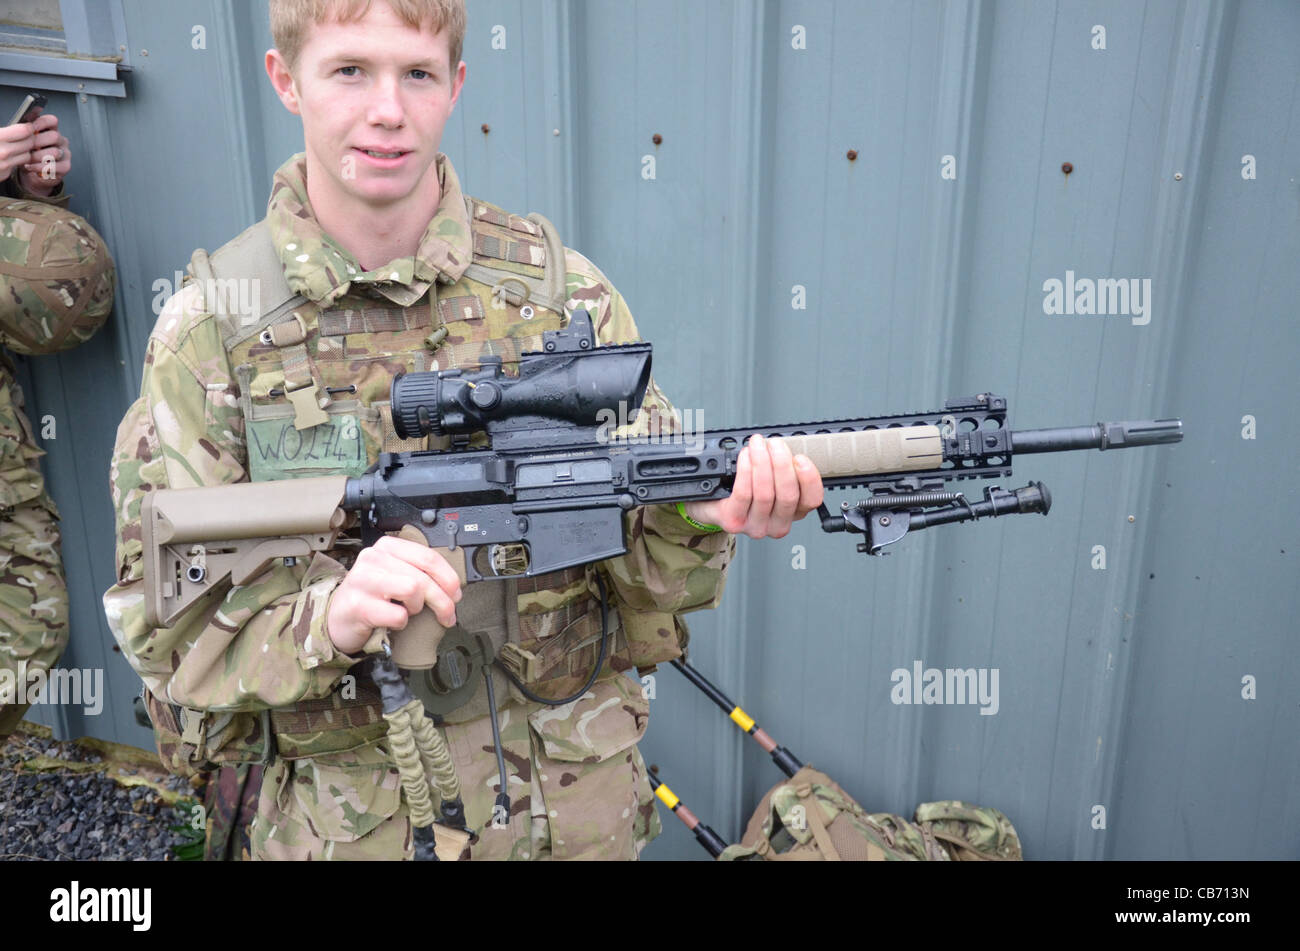 L129A1 Sharpshooter Rifle The new Sharpshooter rifle will improve the  long-range firepower available on the front line, 7.62mm Stock Photo - Alamy